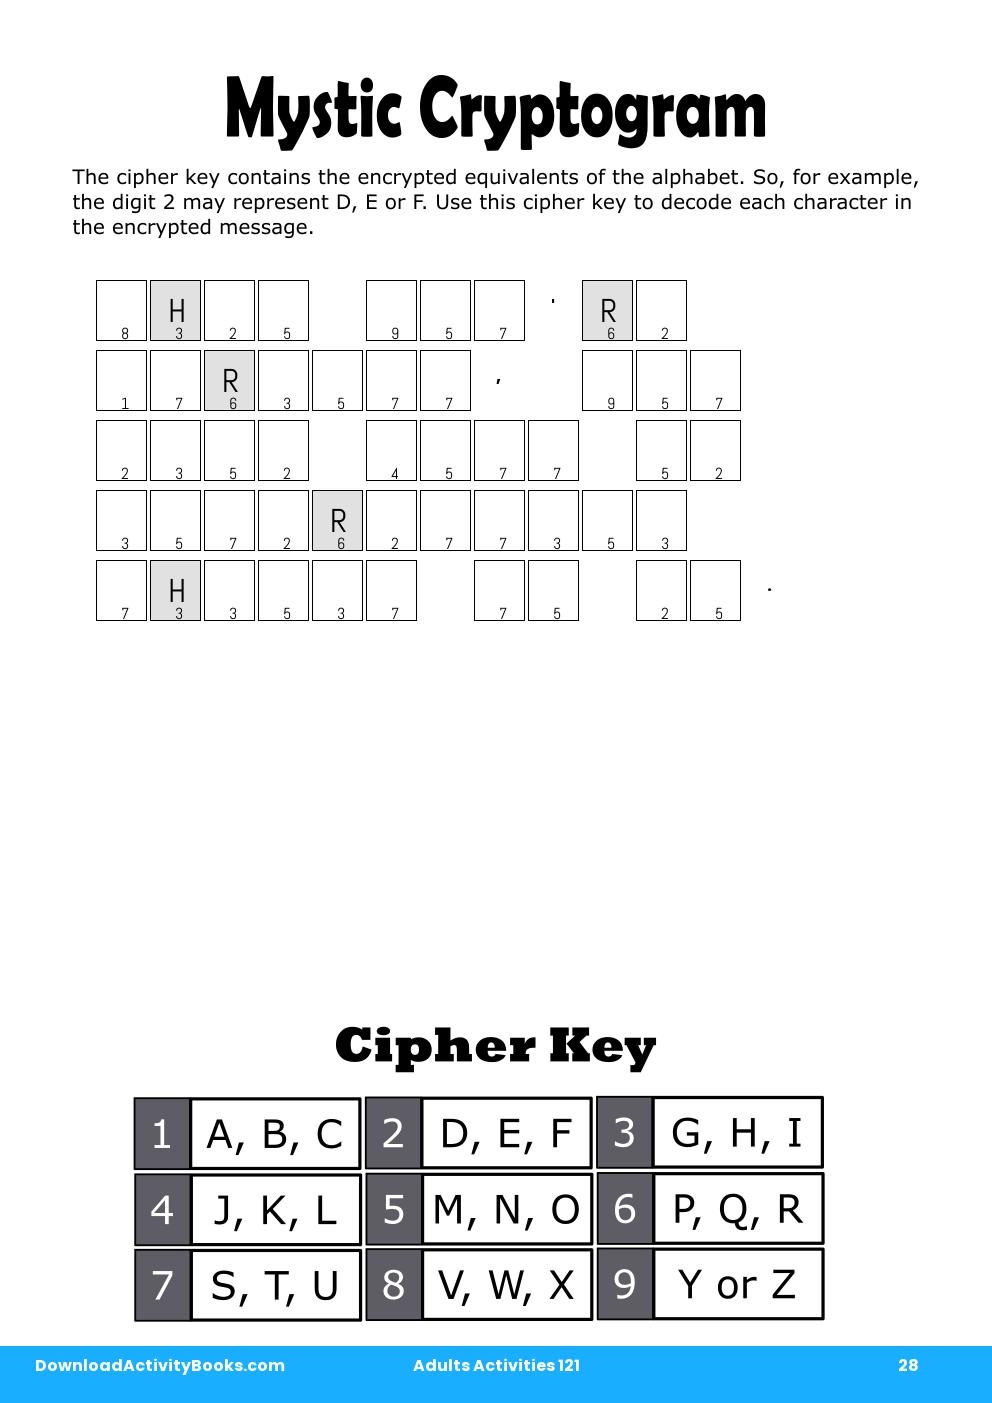 Mystic Cryptogram in Adults Activities 121